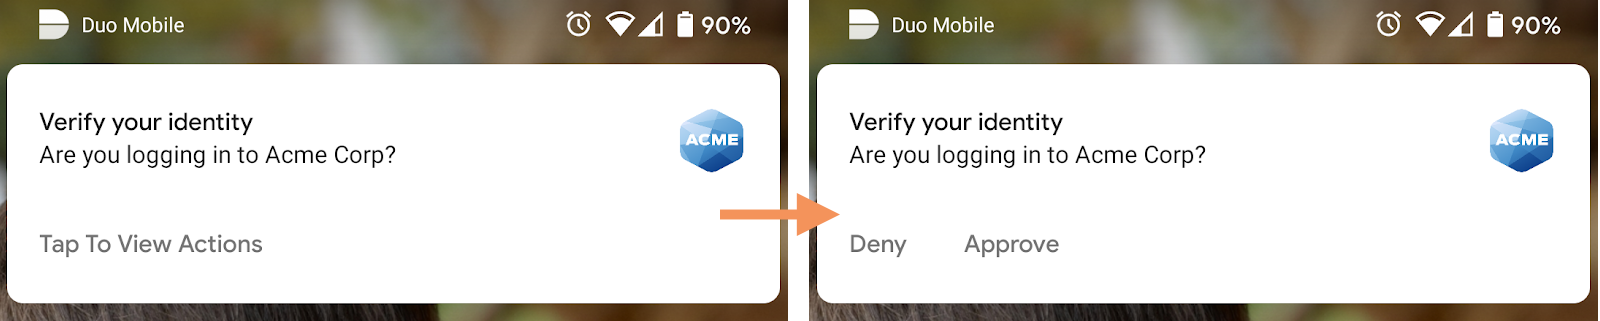 Duo Mobile Notification